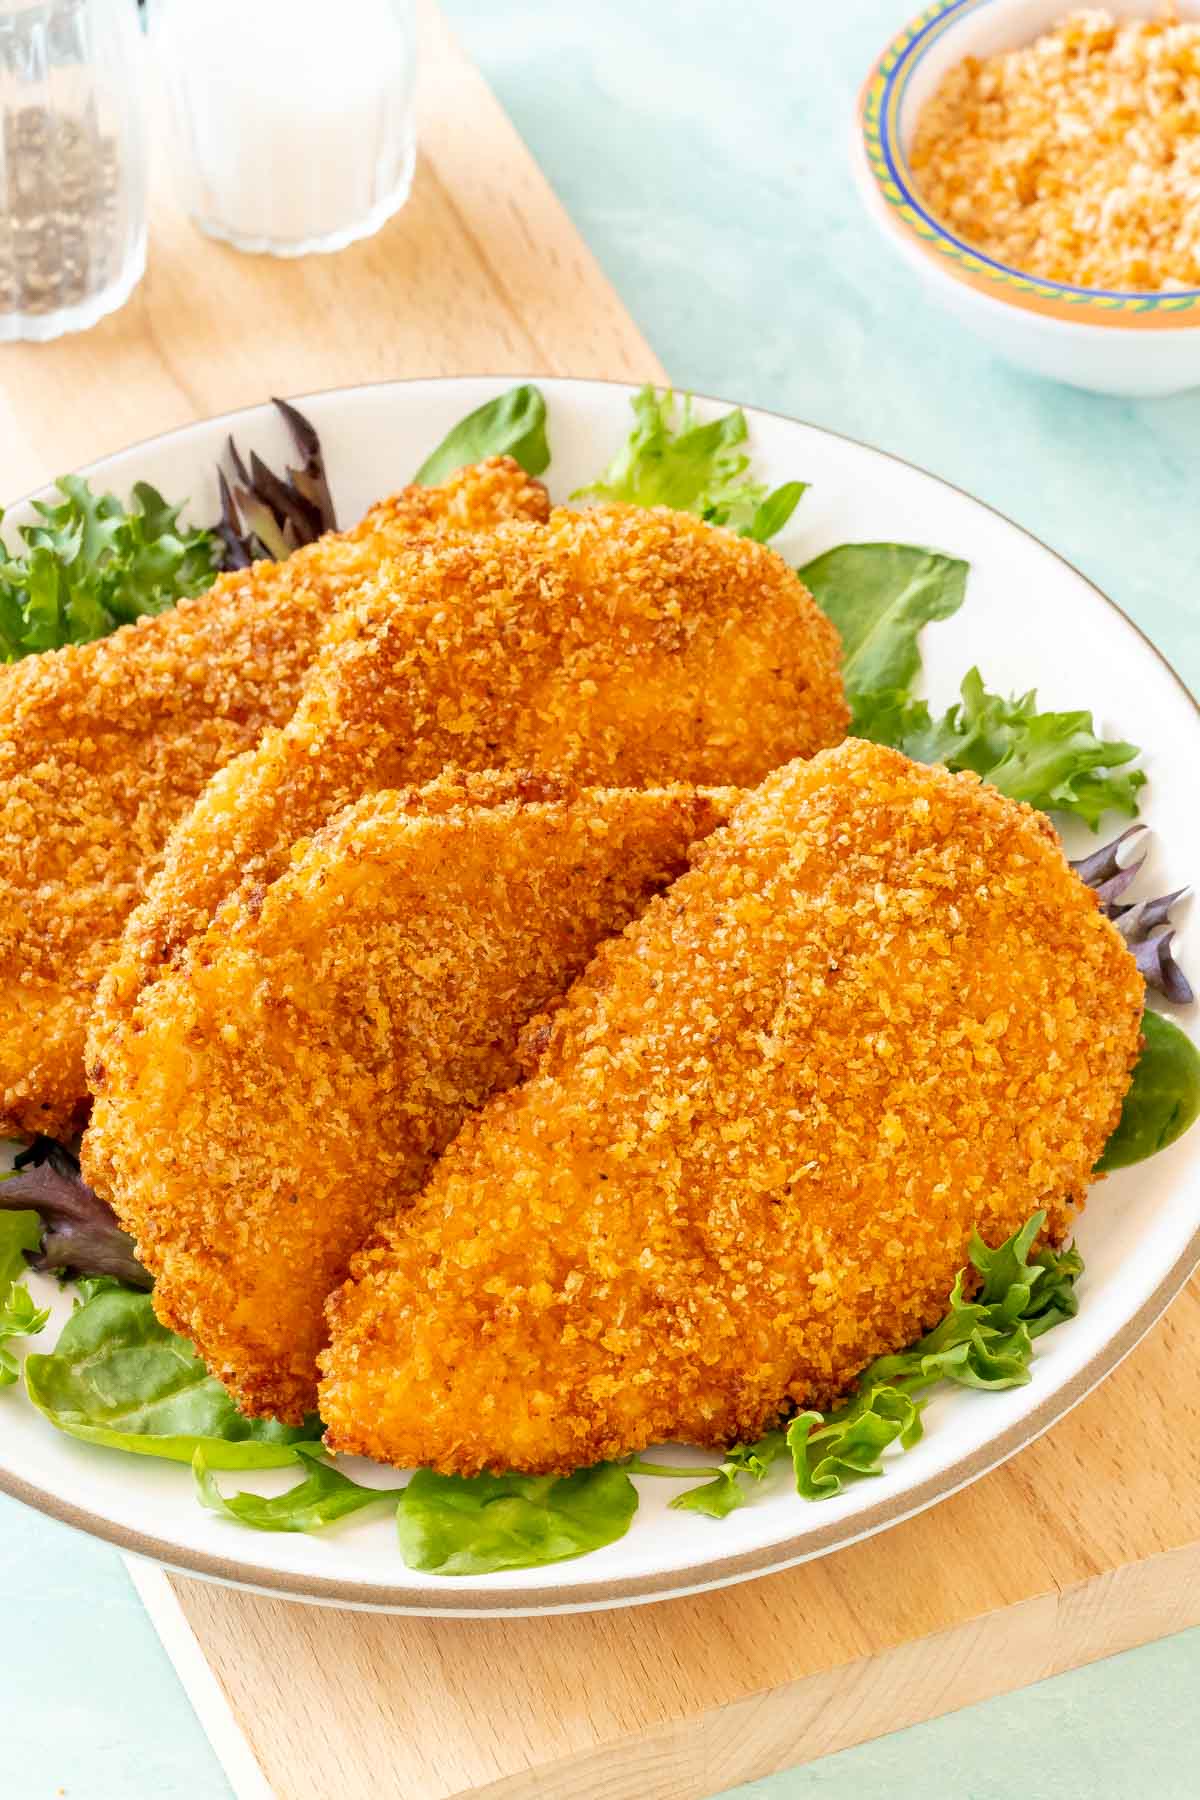 4 Air Fryer Fried Chicken Breasts on a plate, with fresh lettuce around the edges